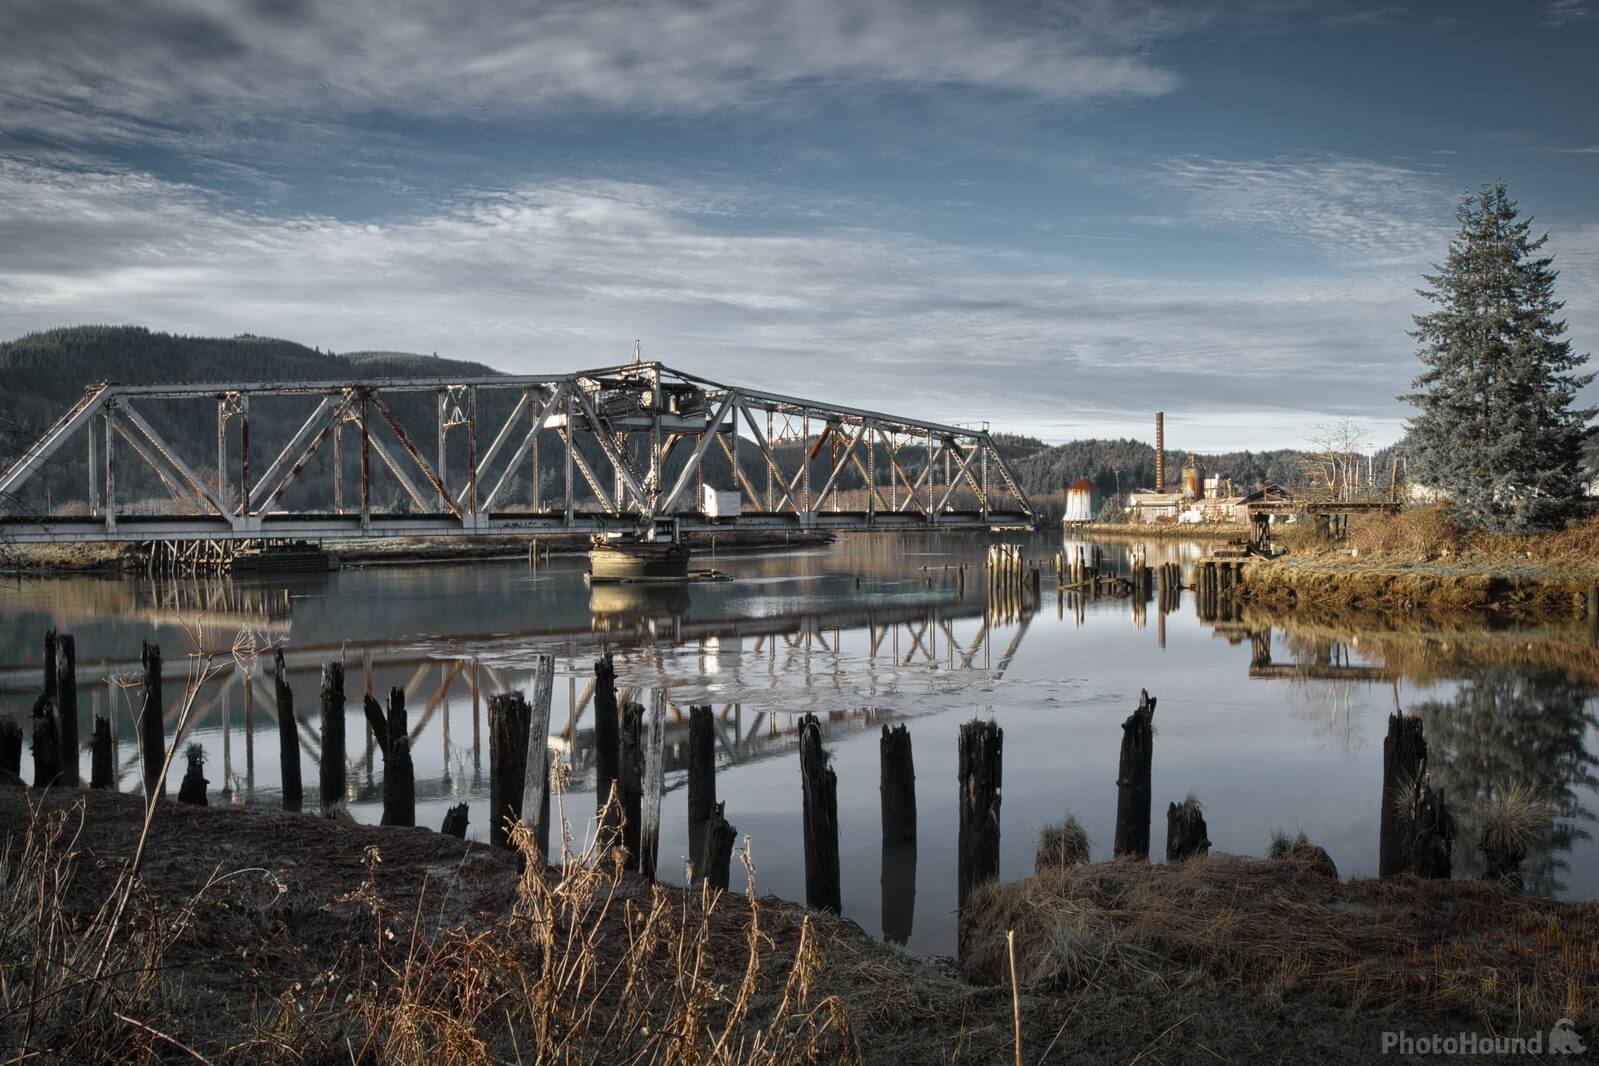 Image of The Abandoned Willapa River Swing Bridge by Steve West